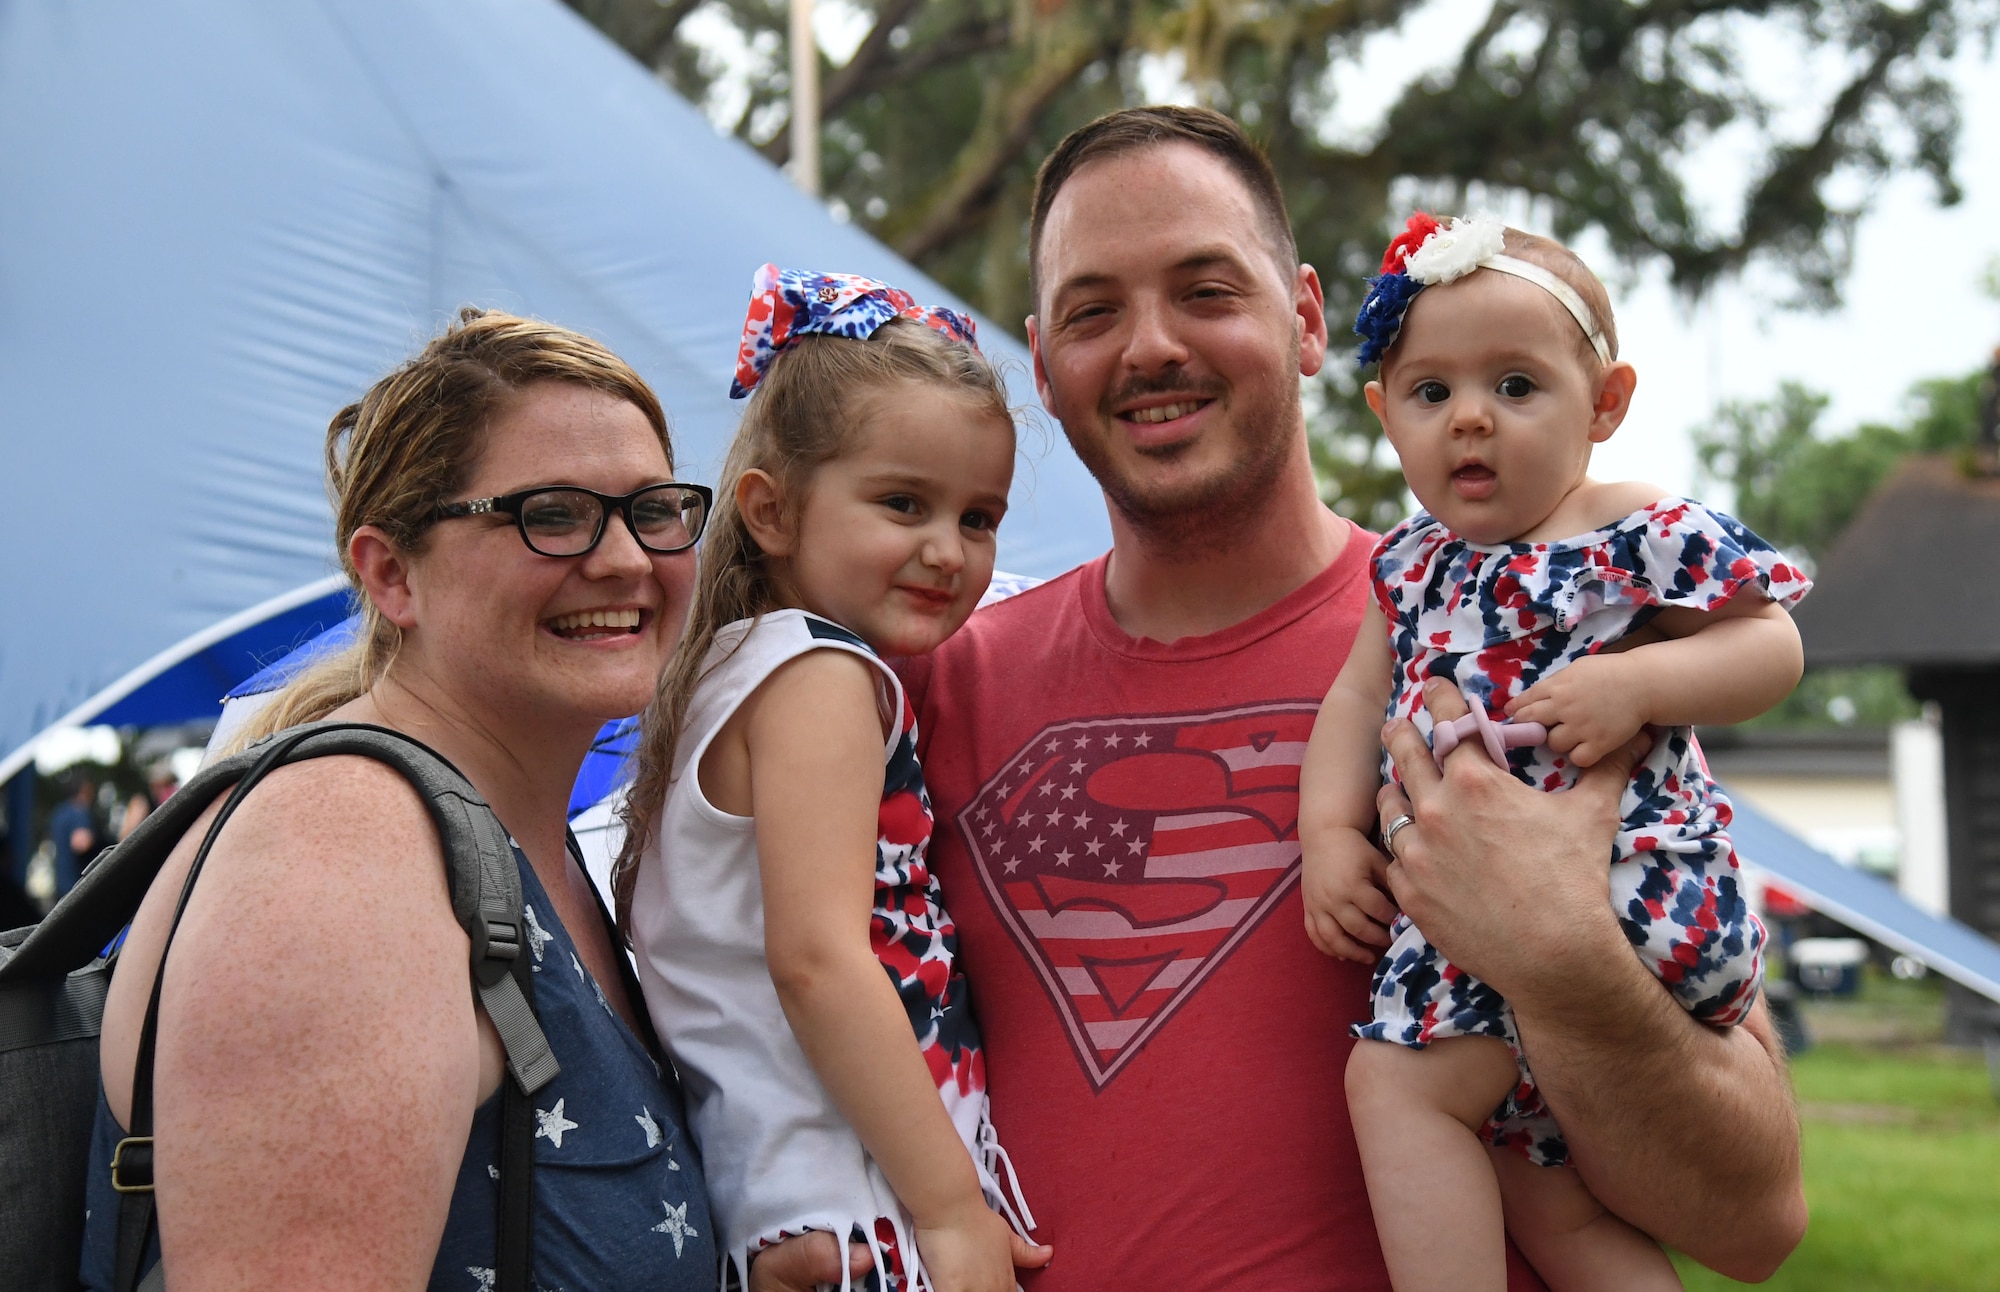 U.S. Air Force Staff Sgt. Adam Shramek, 335th Training Squadron instructor, and his family pose for a photo during Freedom Fest at Marina Park at Keesler Air Force Base, Mississippi, July 2, 2021. The event also included hot wings and watermelon eating competitions and fireworks. (U.S. Air Force photo by Kemberly Groue)